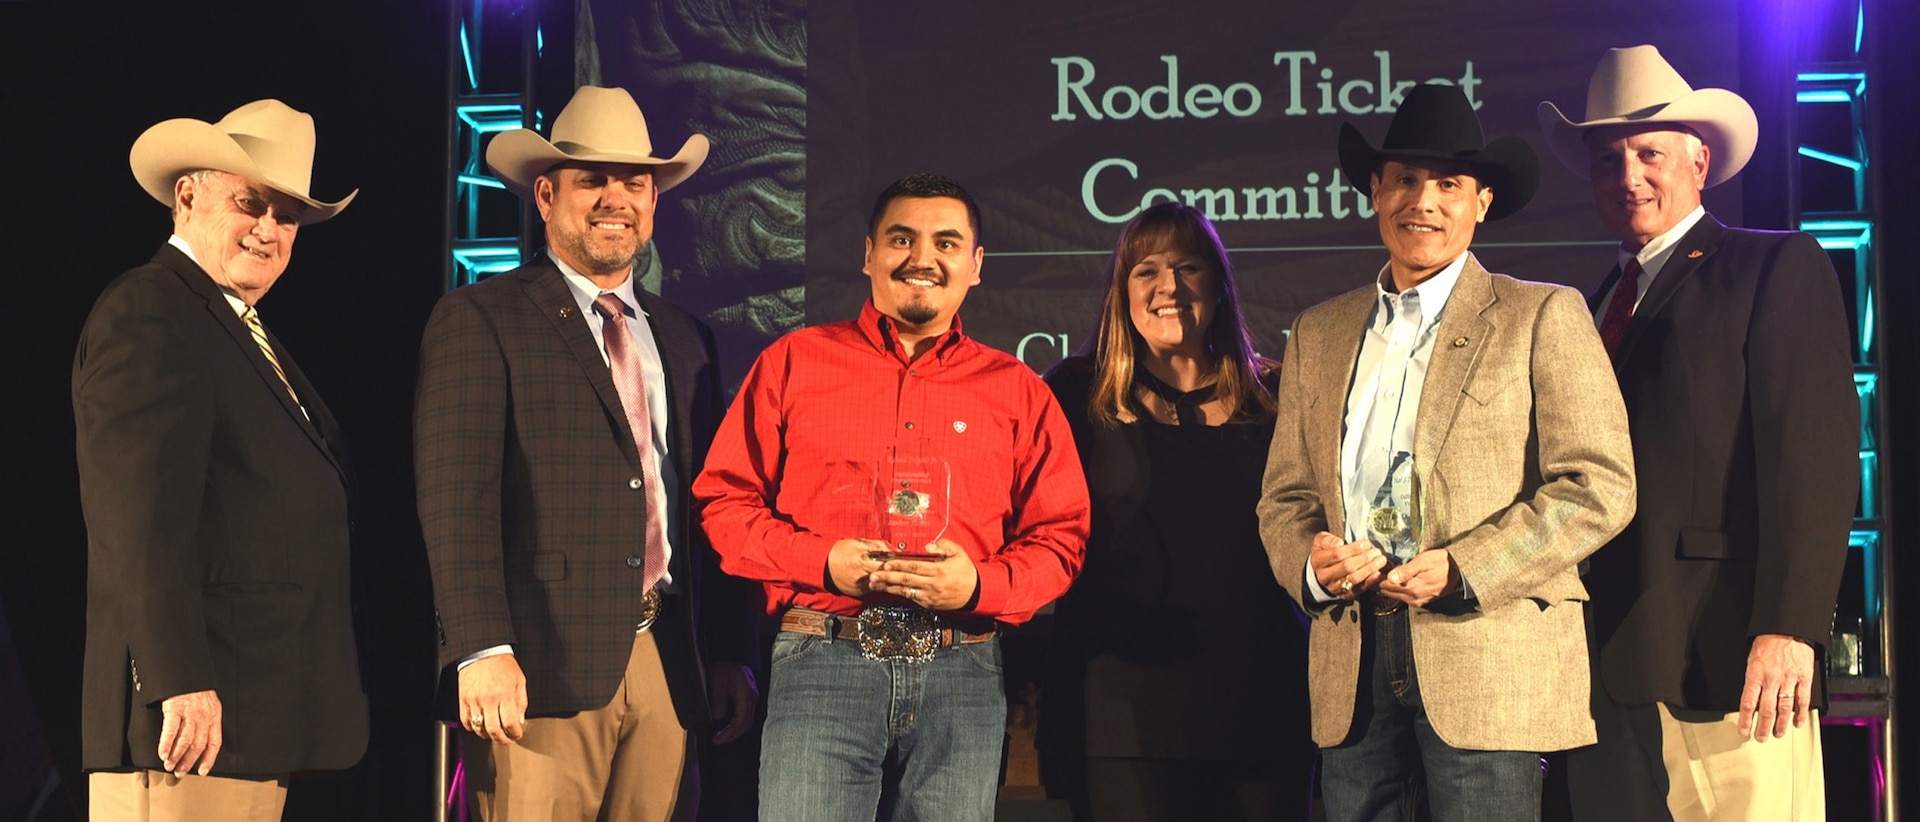 (From left) San Antonio Stock Show & Rodeo Chairman of the Board Joe Soules; Executive Director and CEO Cody Davenport; Director of Military Affairs for Texas A&M University-San Antonio Richard Delgado Jr.; Rodeo Ticket Committee Chairwoman Kelly Ross; Lt. Cmdr. Markel Zatarain of Navy Recruiting District San Antonio; and Rodeo President Rusty Collier pose for photos after Delgado and Zatarain were recognized as Outstanding Committeemen and Volunteers of the Year for 2017-2018 during the San Antonio Stock Show & Rodeo Hall of Fame Induction and Awards Ceremony held at the Freeman Expo Hall.